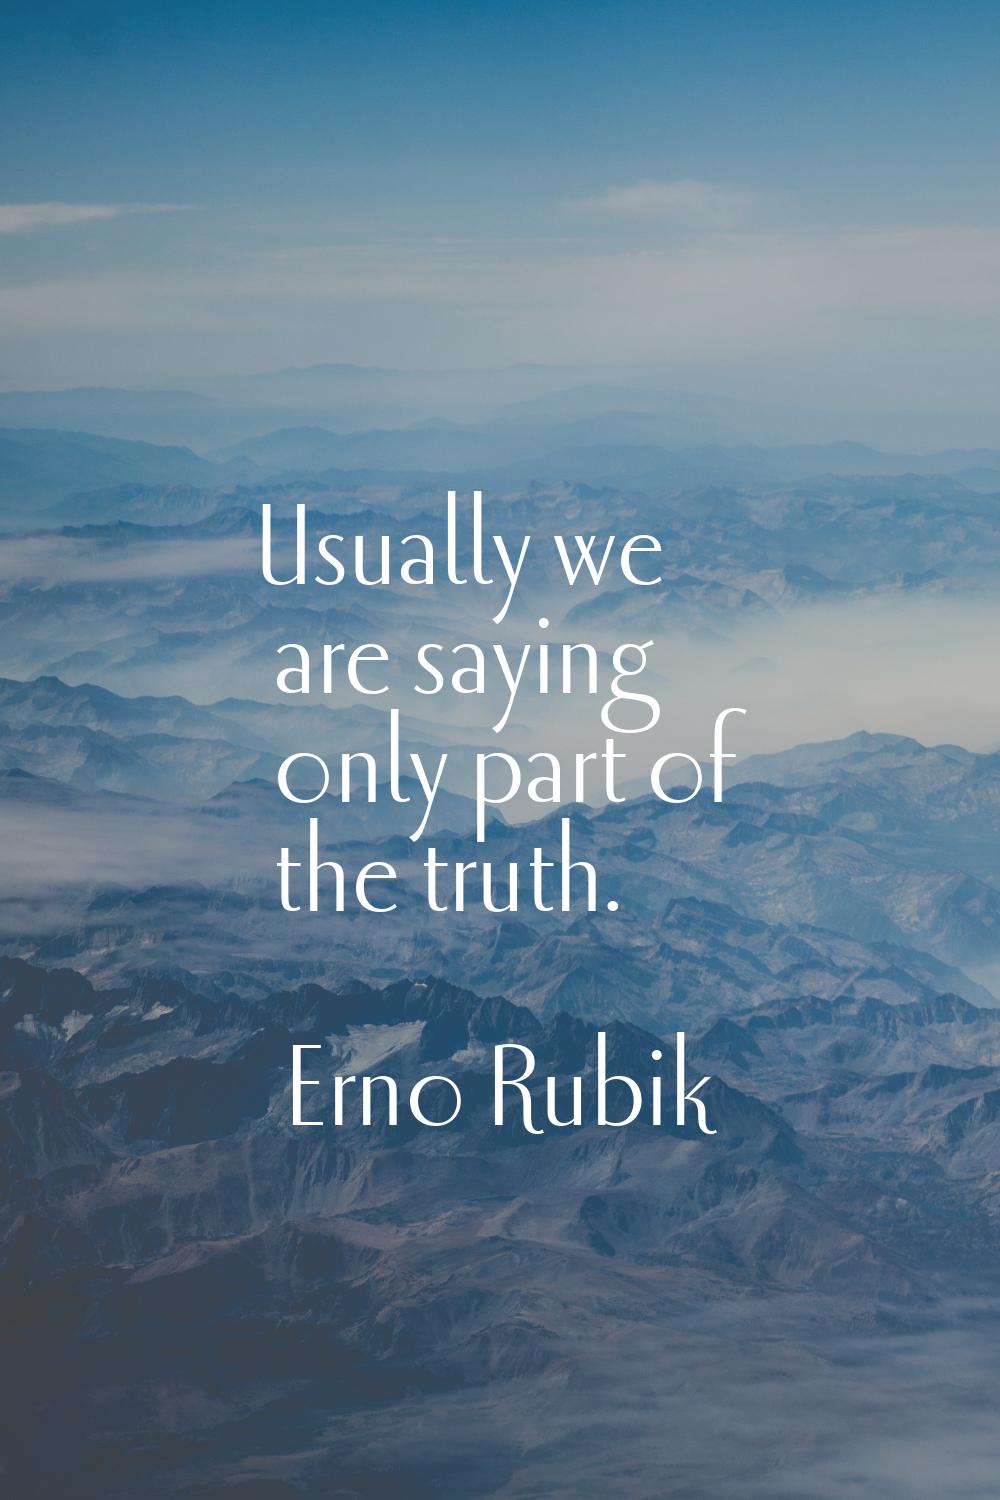 Usually we are saying only part of the truth.